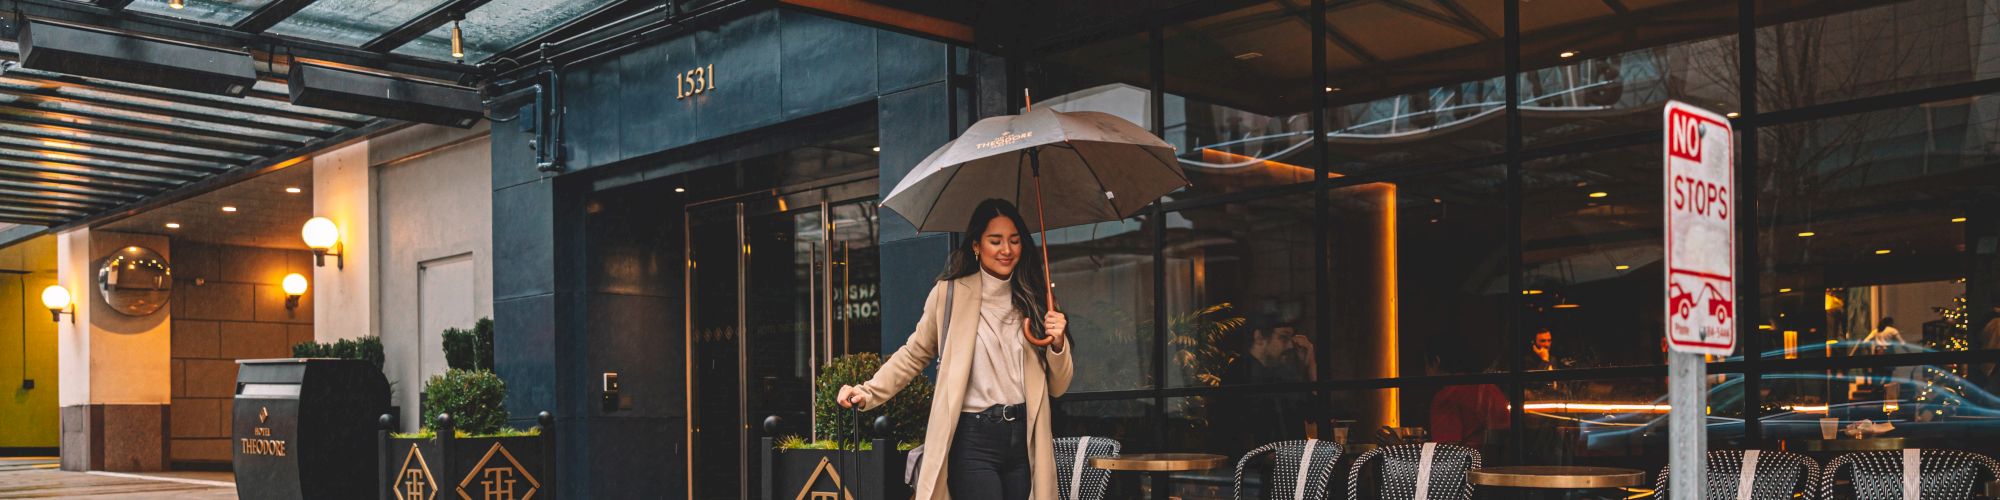 A woman holding an umbrella is walking with rolling luggage outside Hotel Theodore on a rainy day. She is dressed in a long coat and casual attire.